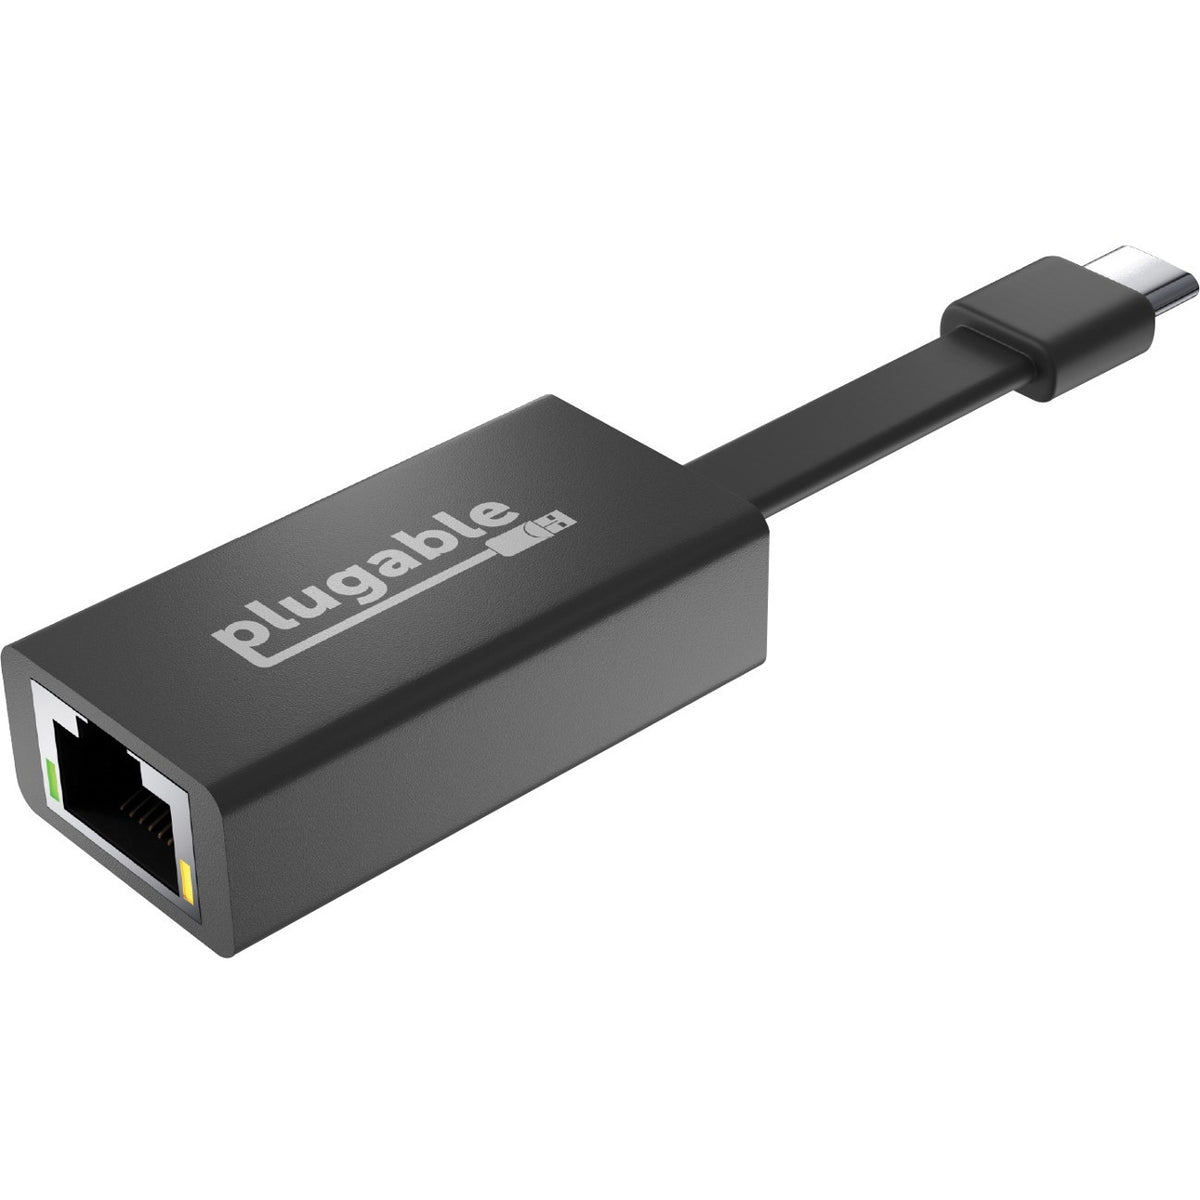 Plugable USB C to Ethernet Adapter, Fast and Reliable Gigabit Speed - USBC-TE1000